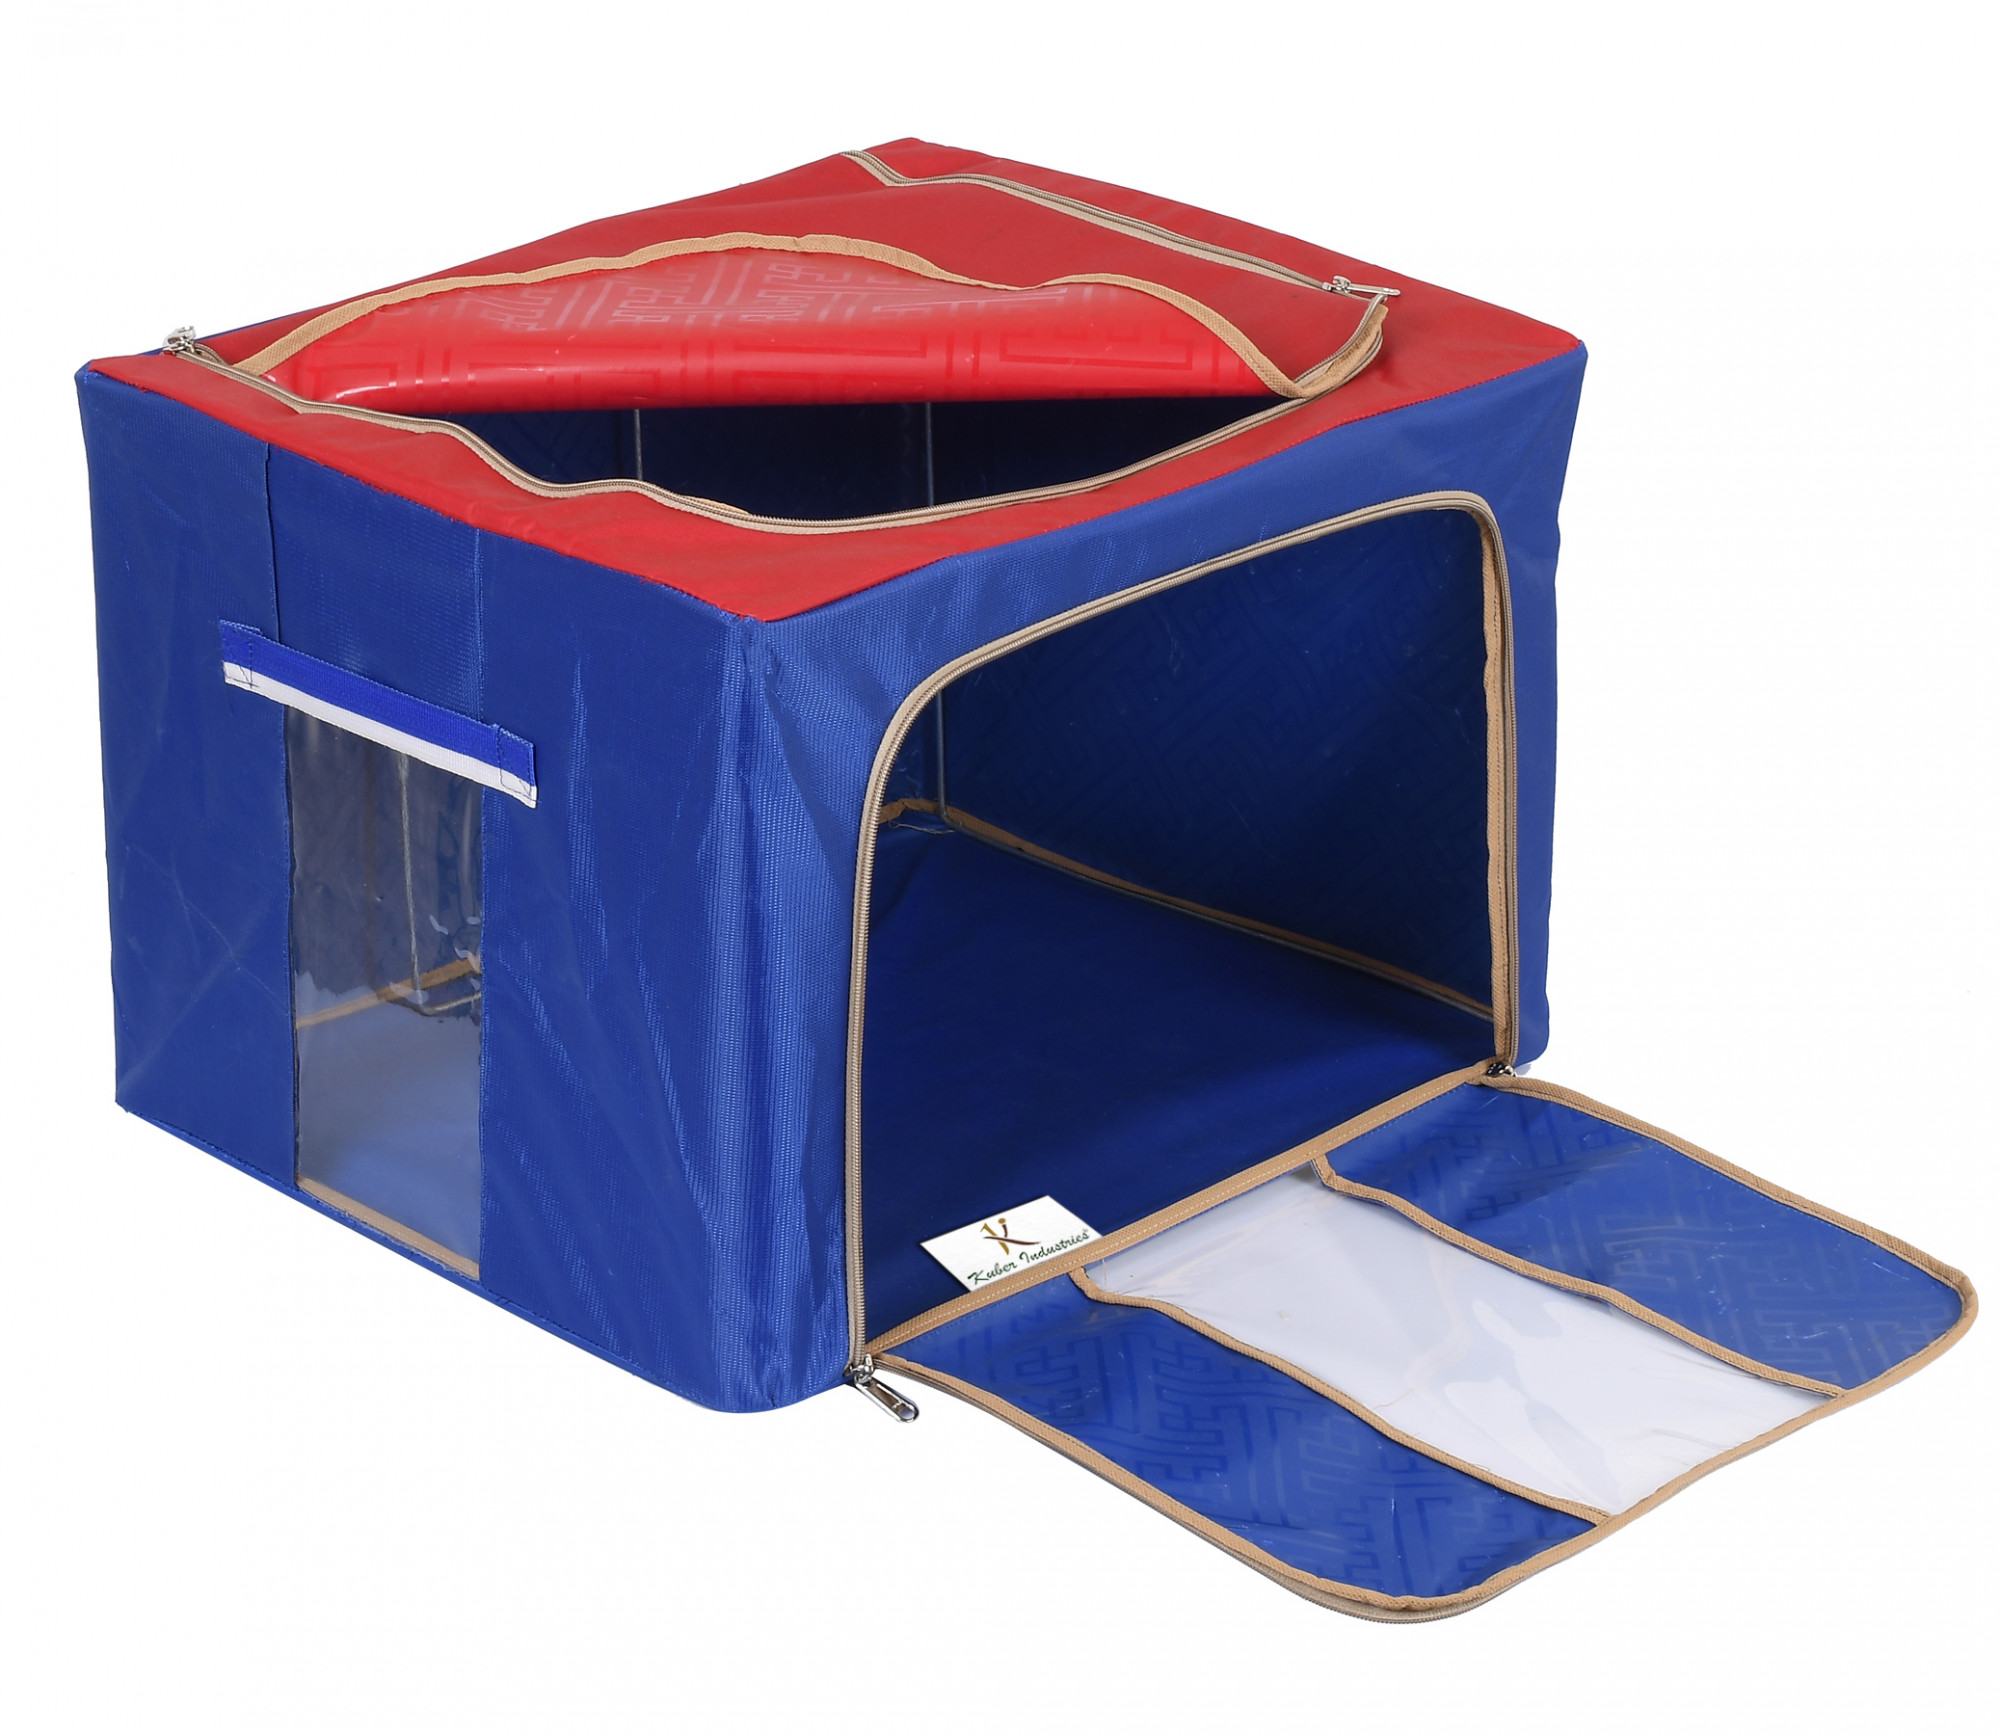 Kuber Industries Steel Frame Storage Box/Organizer For Clothing, Blankets, Bedding With Clear Window, 44Ltr. (Red & Blue)-44KM0297